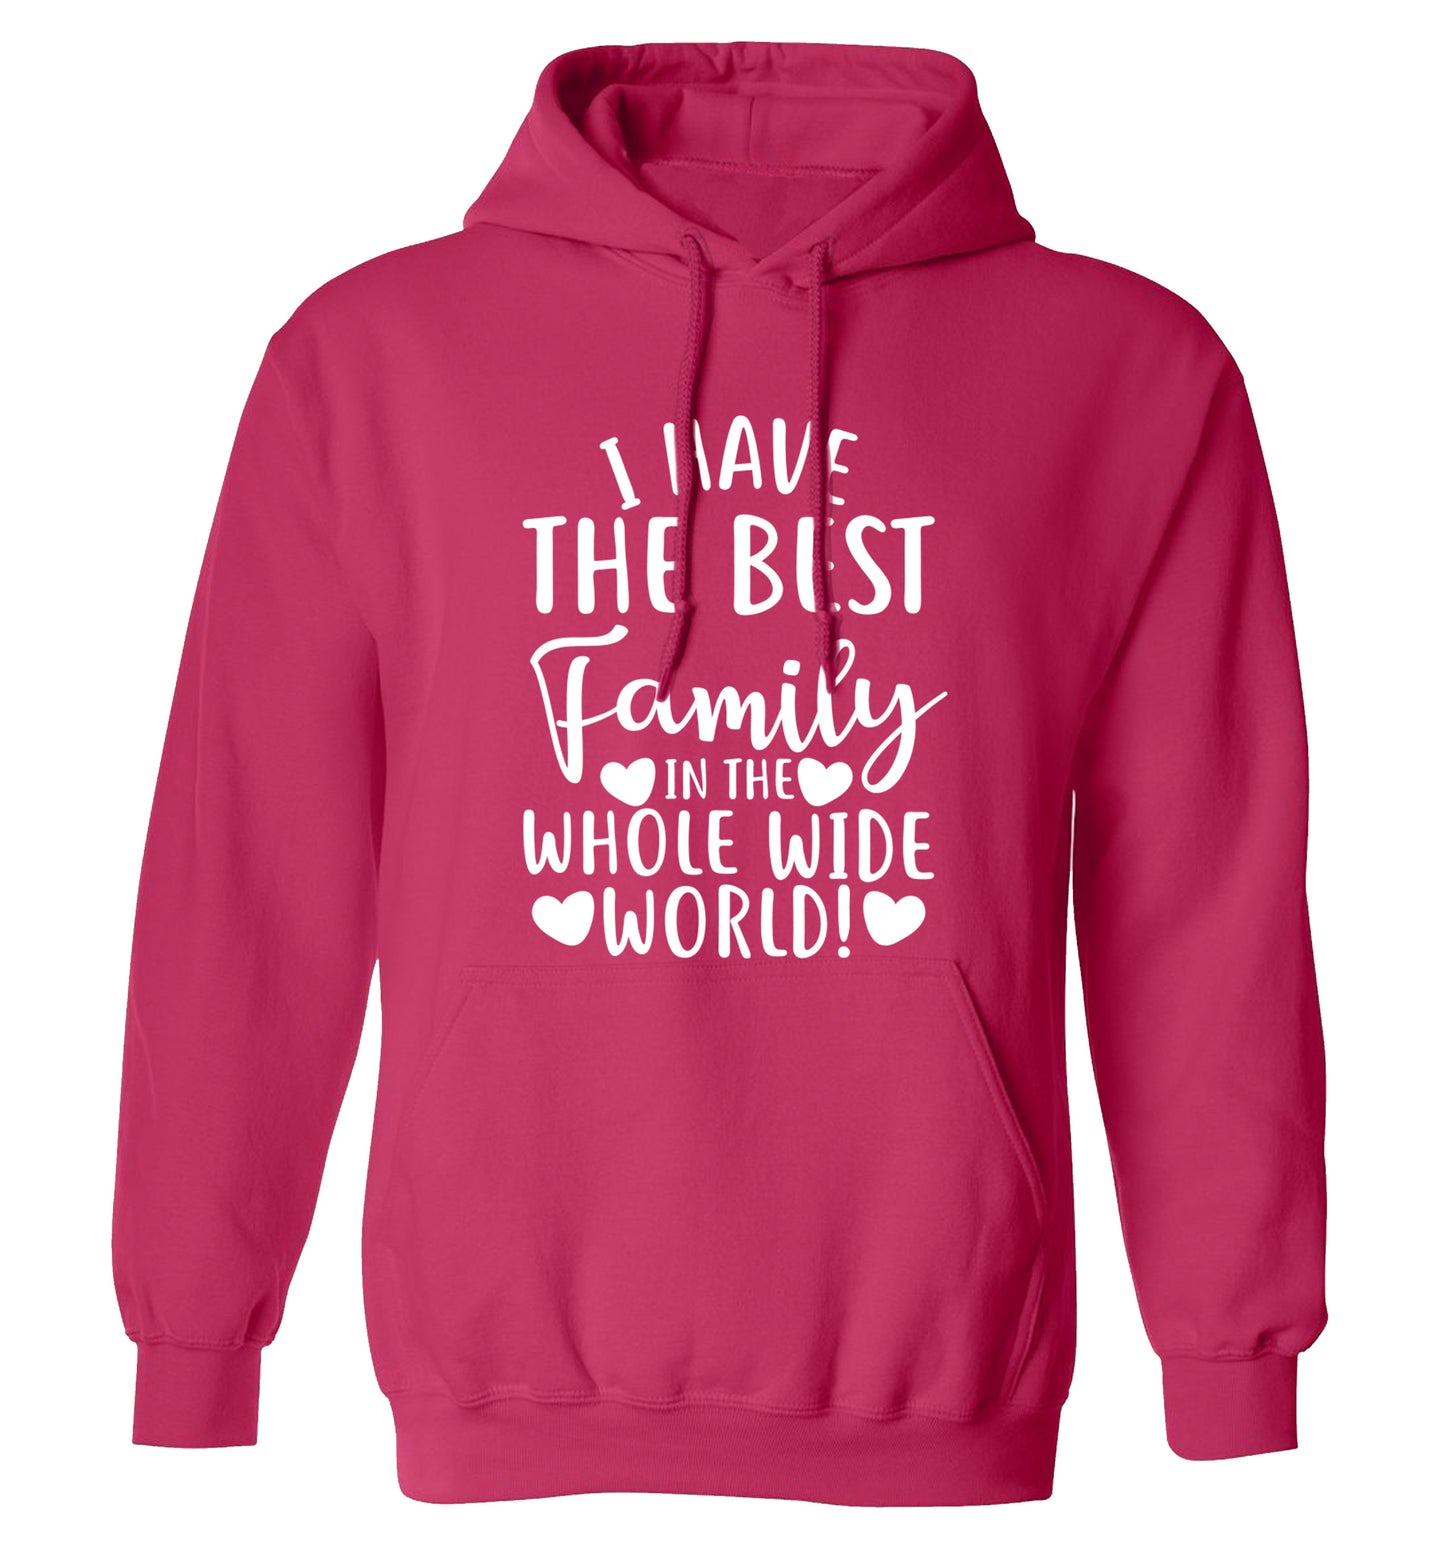 I have the best family in the whole wide world! adults unisex pink hoodie 2XL